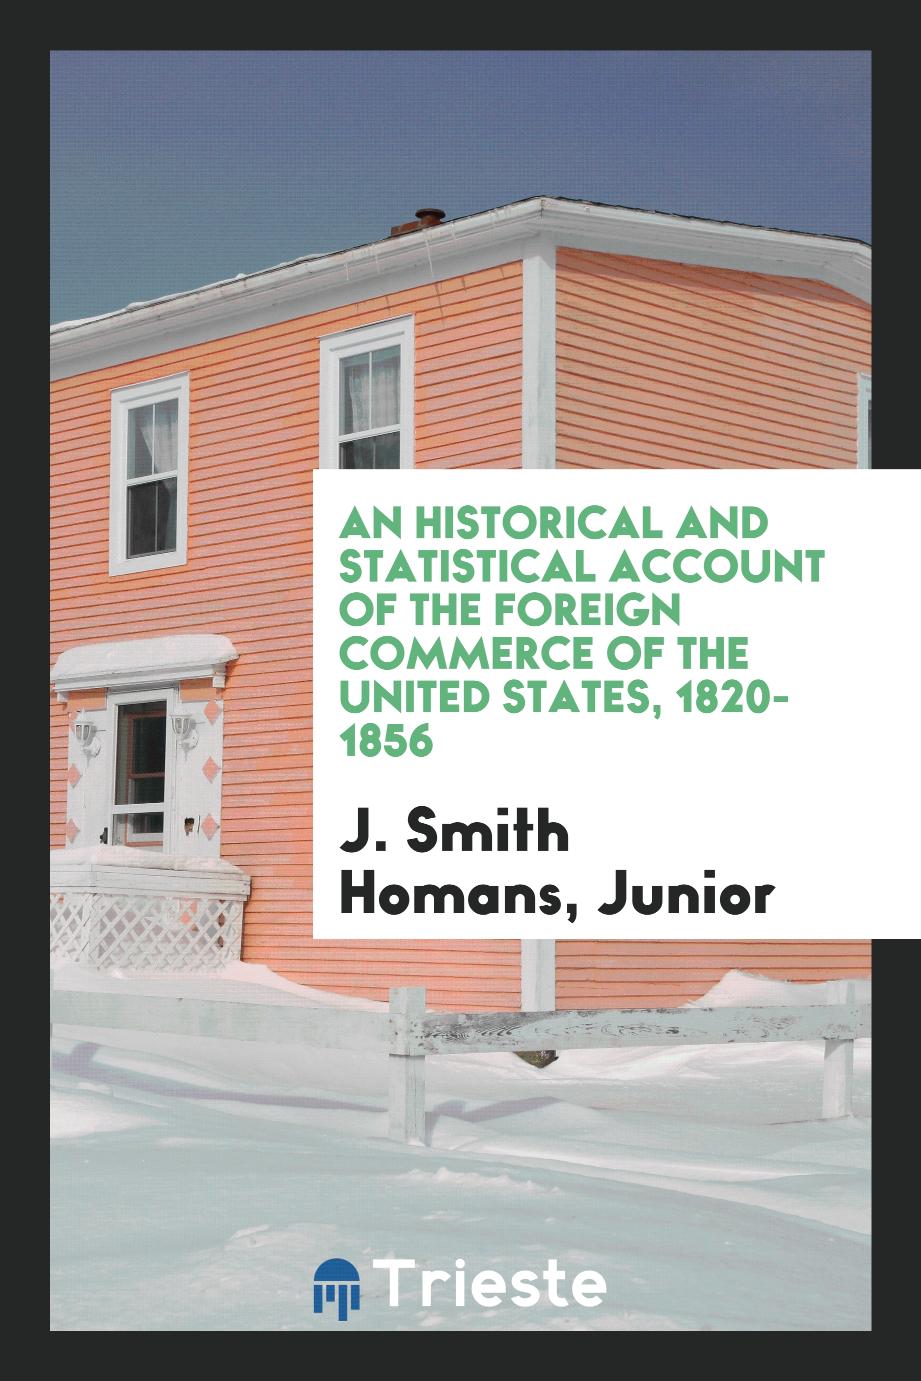 An Historical and Statistical Account of the Foreign Commerce of the United States, 1820-1856